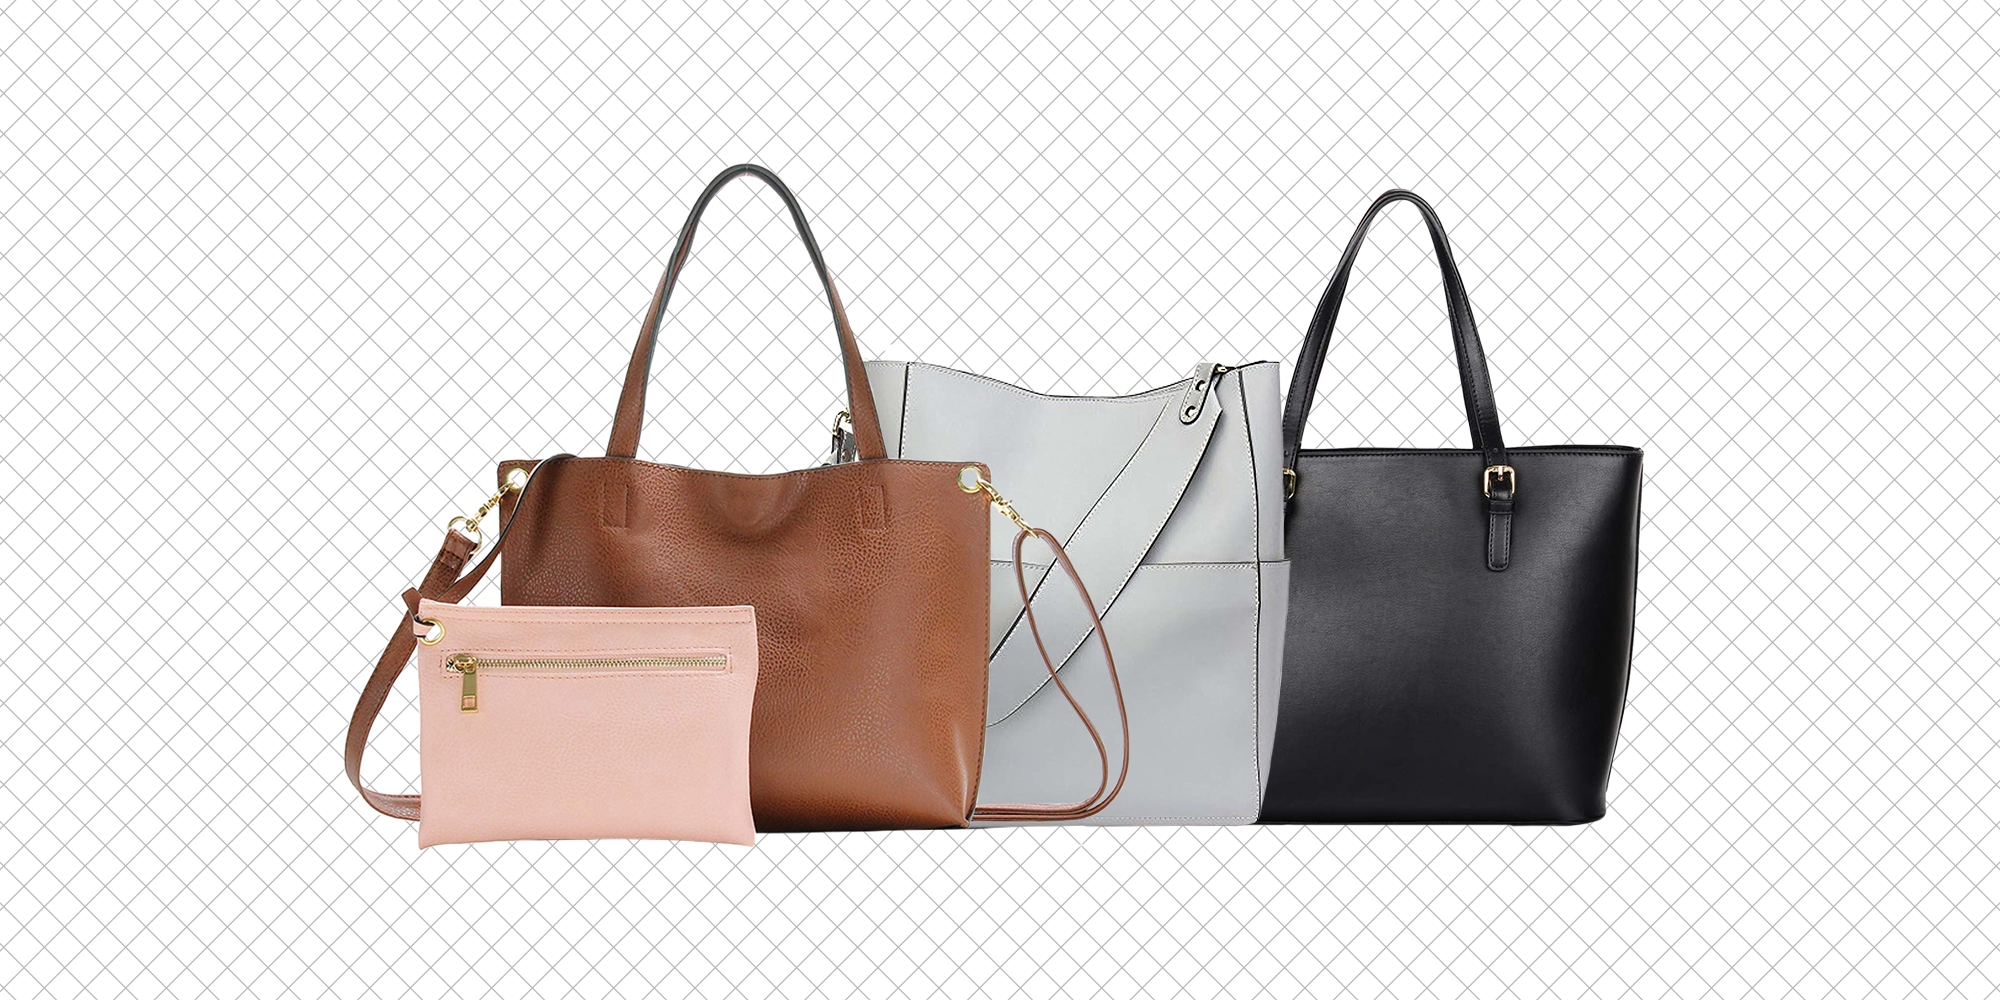 Best Tote Bags on Amazon 2020 - 12 